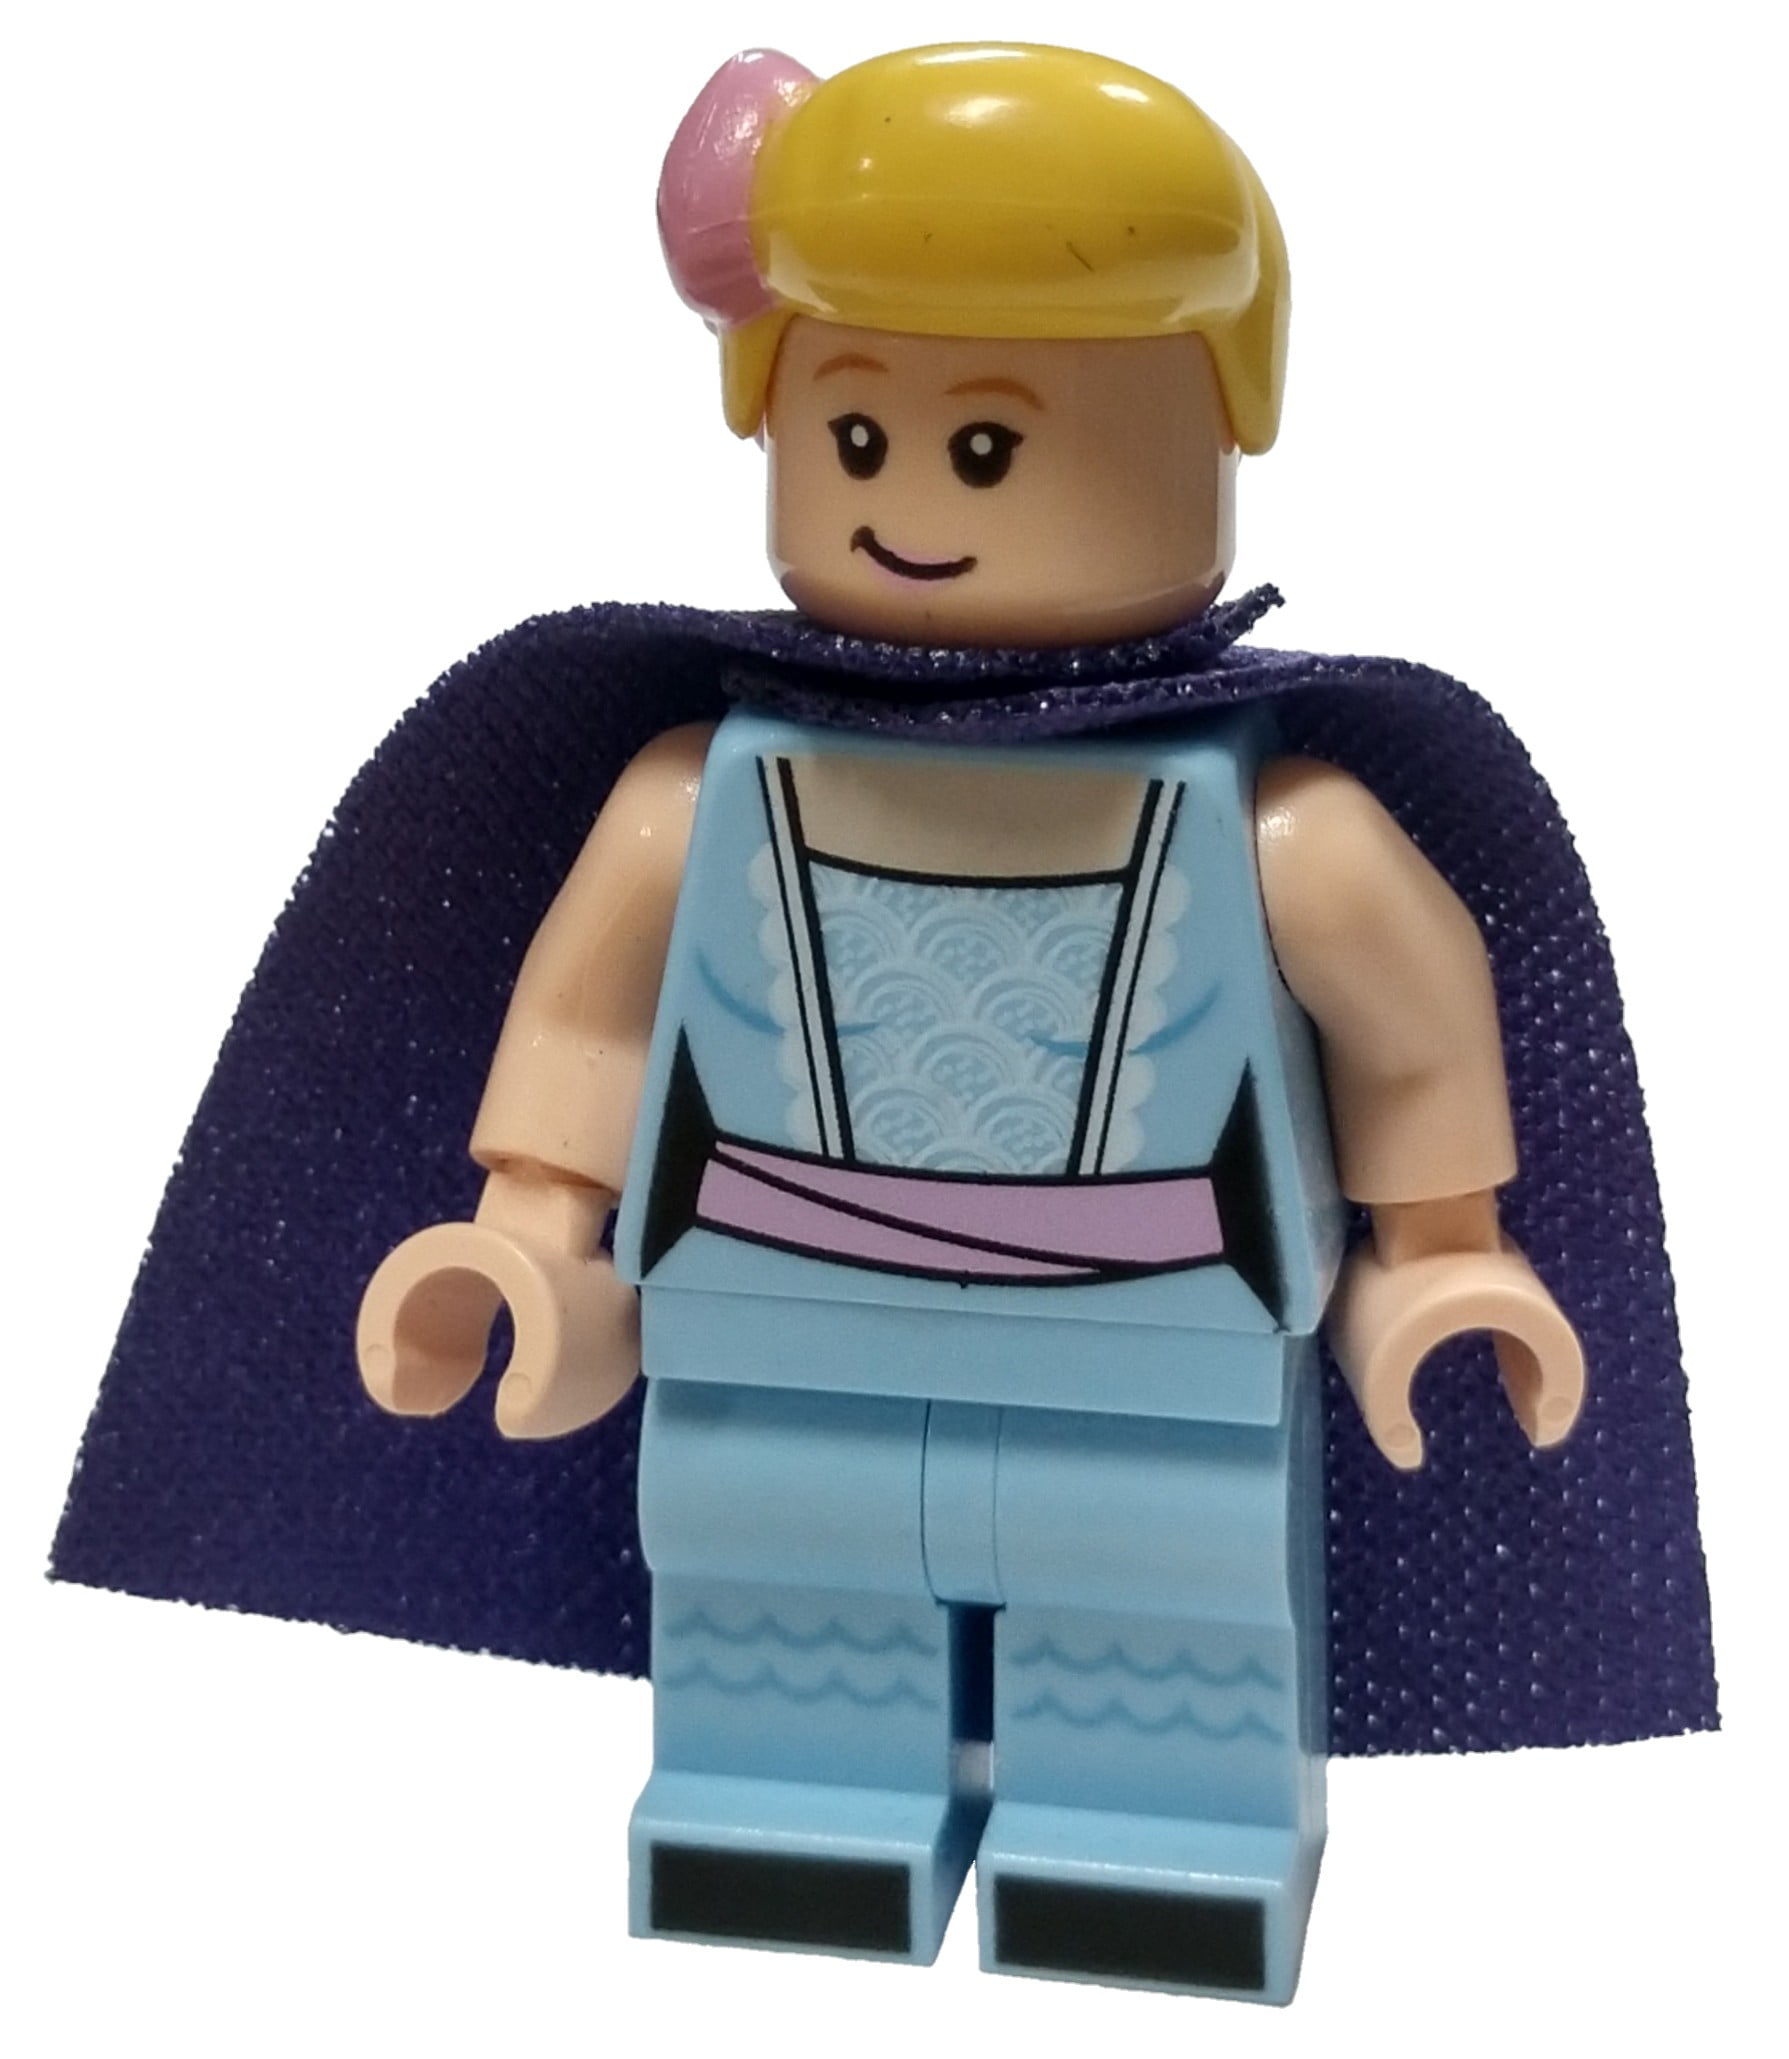 Bagged LEGO Disney Toy Story 4 Bo Peep Minifigure from 10770 